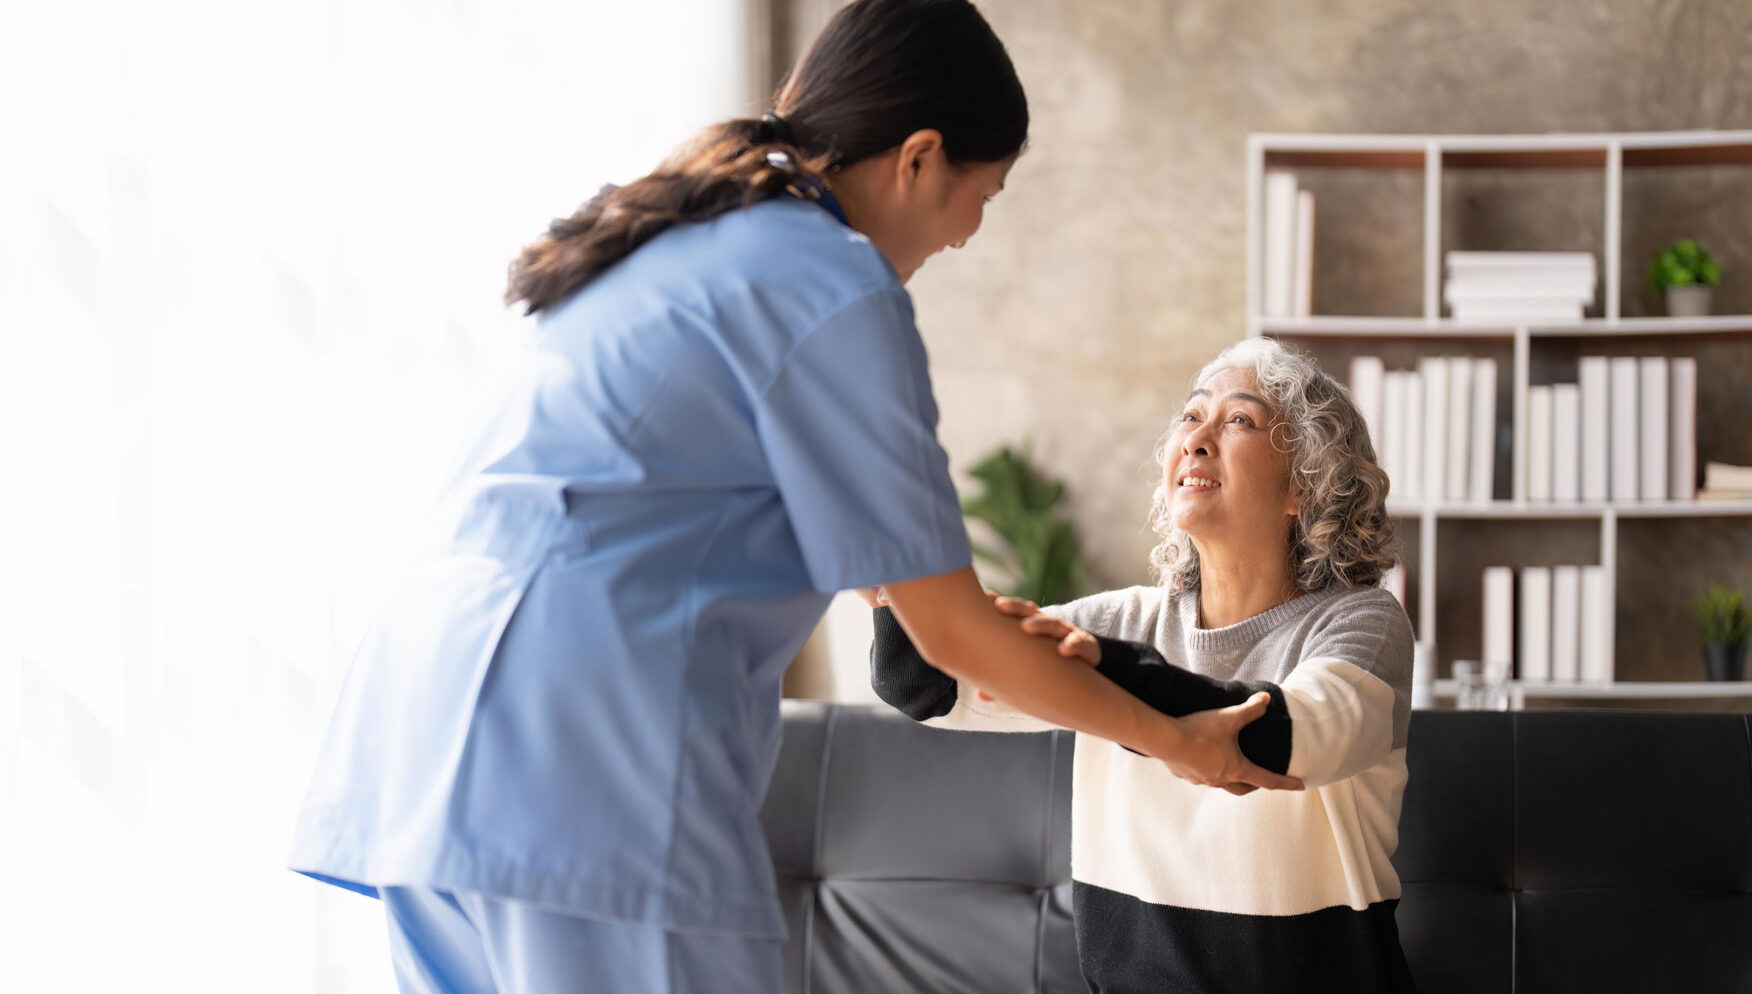 Home health care nurse in blue scrubs assisting an elderly patient